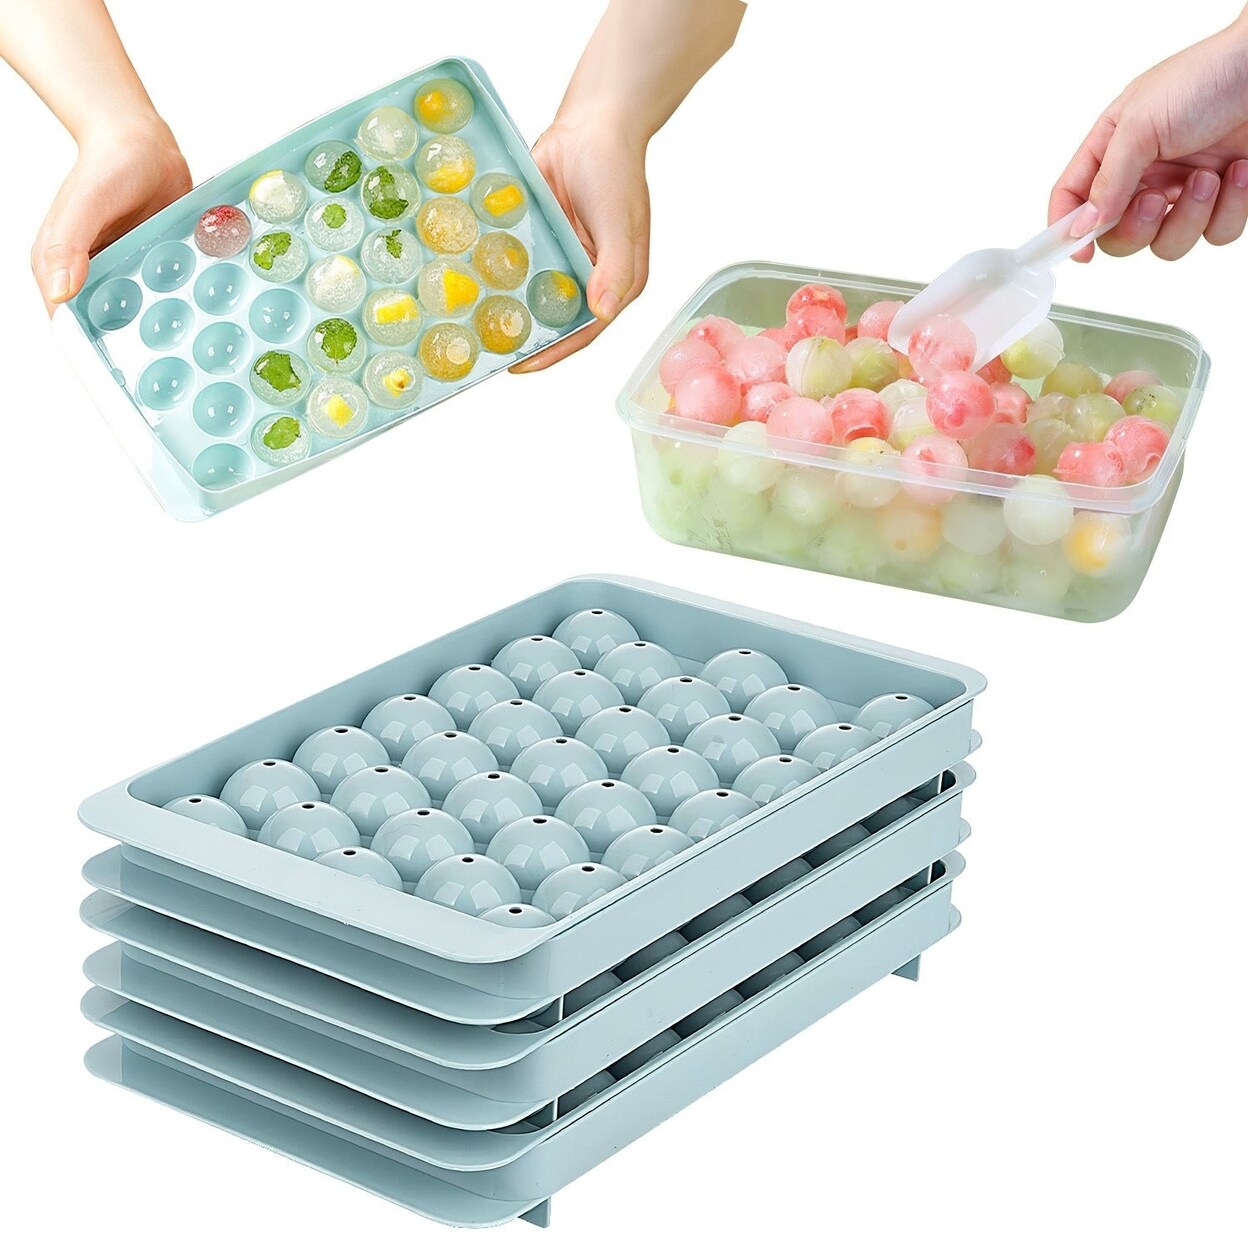 SKUSHOPS 4 Packs Small Ice Cube Trays Mini Circle Ice Cube Tray Round Ice Ball Maker Mold with Lid Bin 132Pcs Ice Cubes for